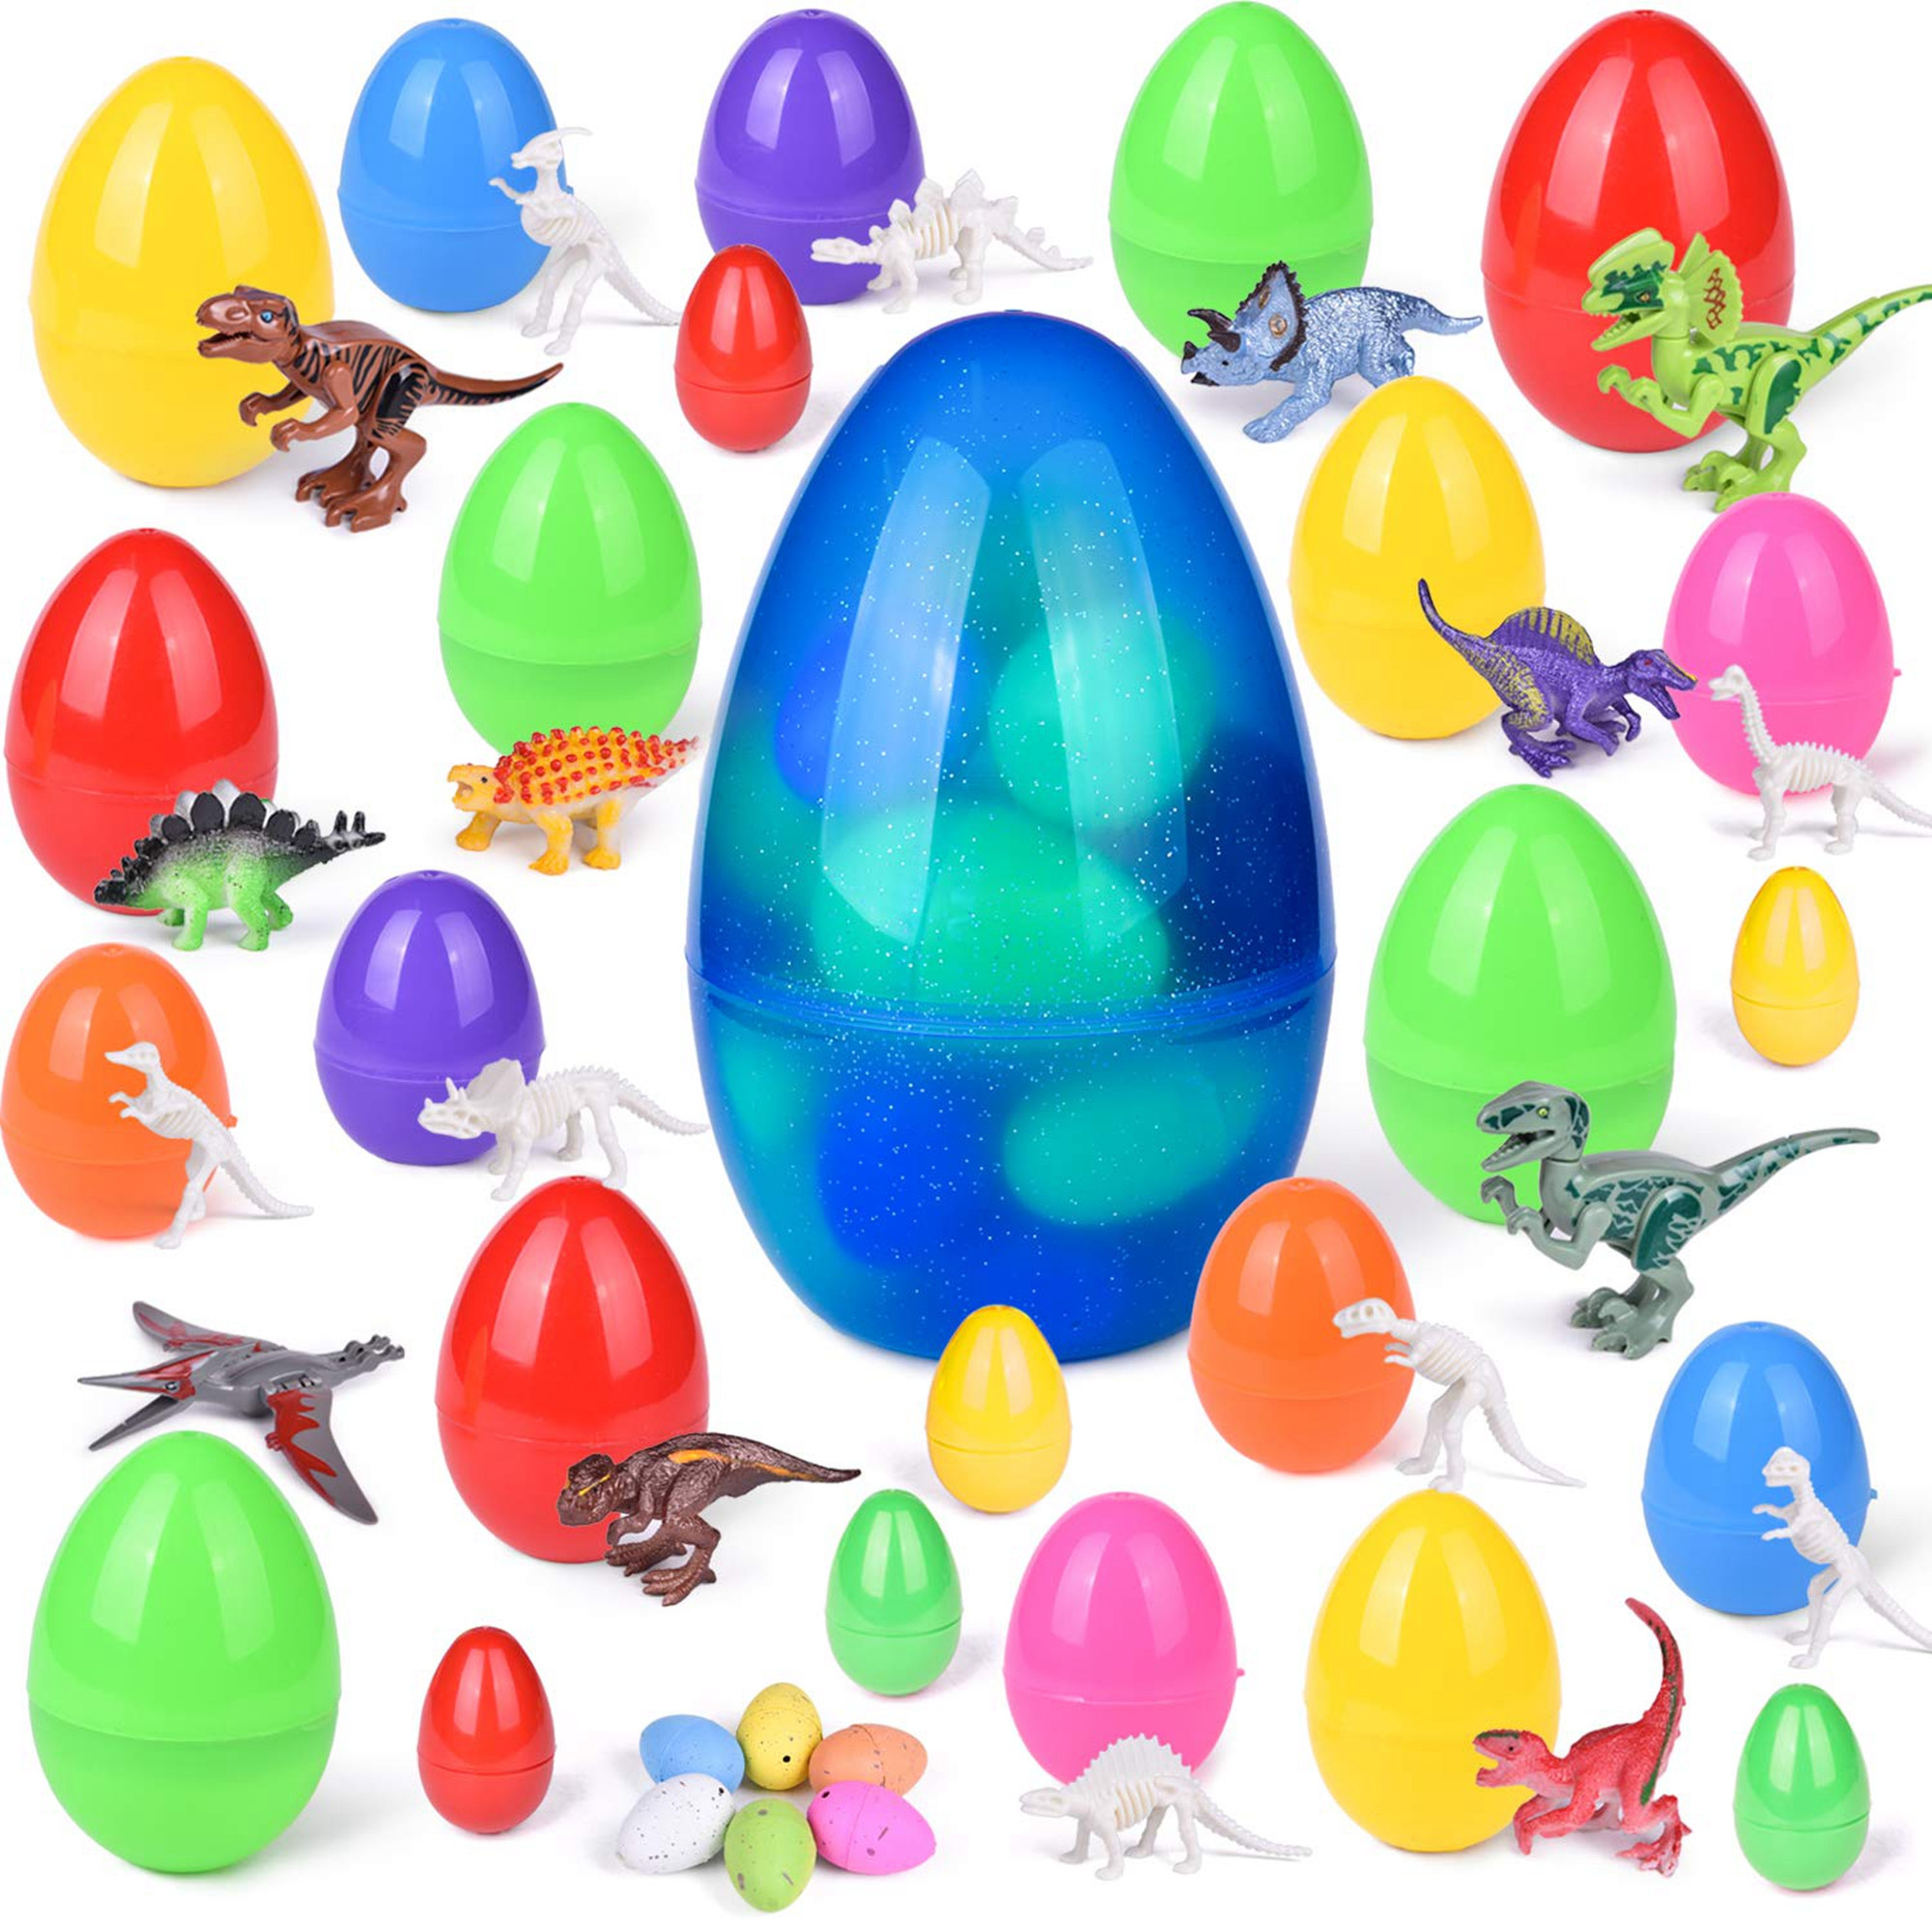 Party City Easter Eggs
 25 PCs Easter Eggs with Dinosaur Toys Easter Basket